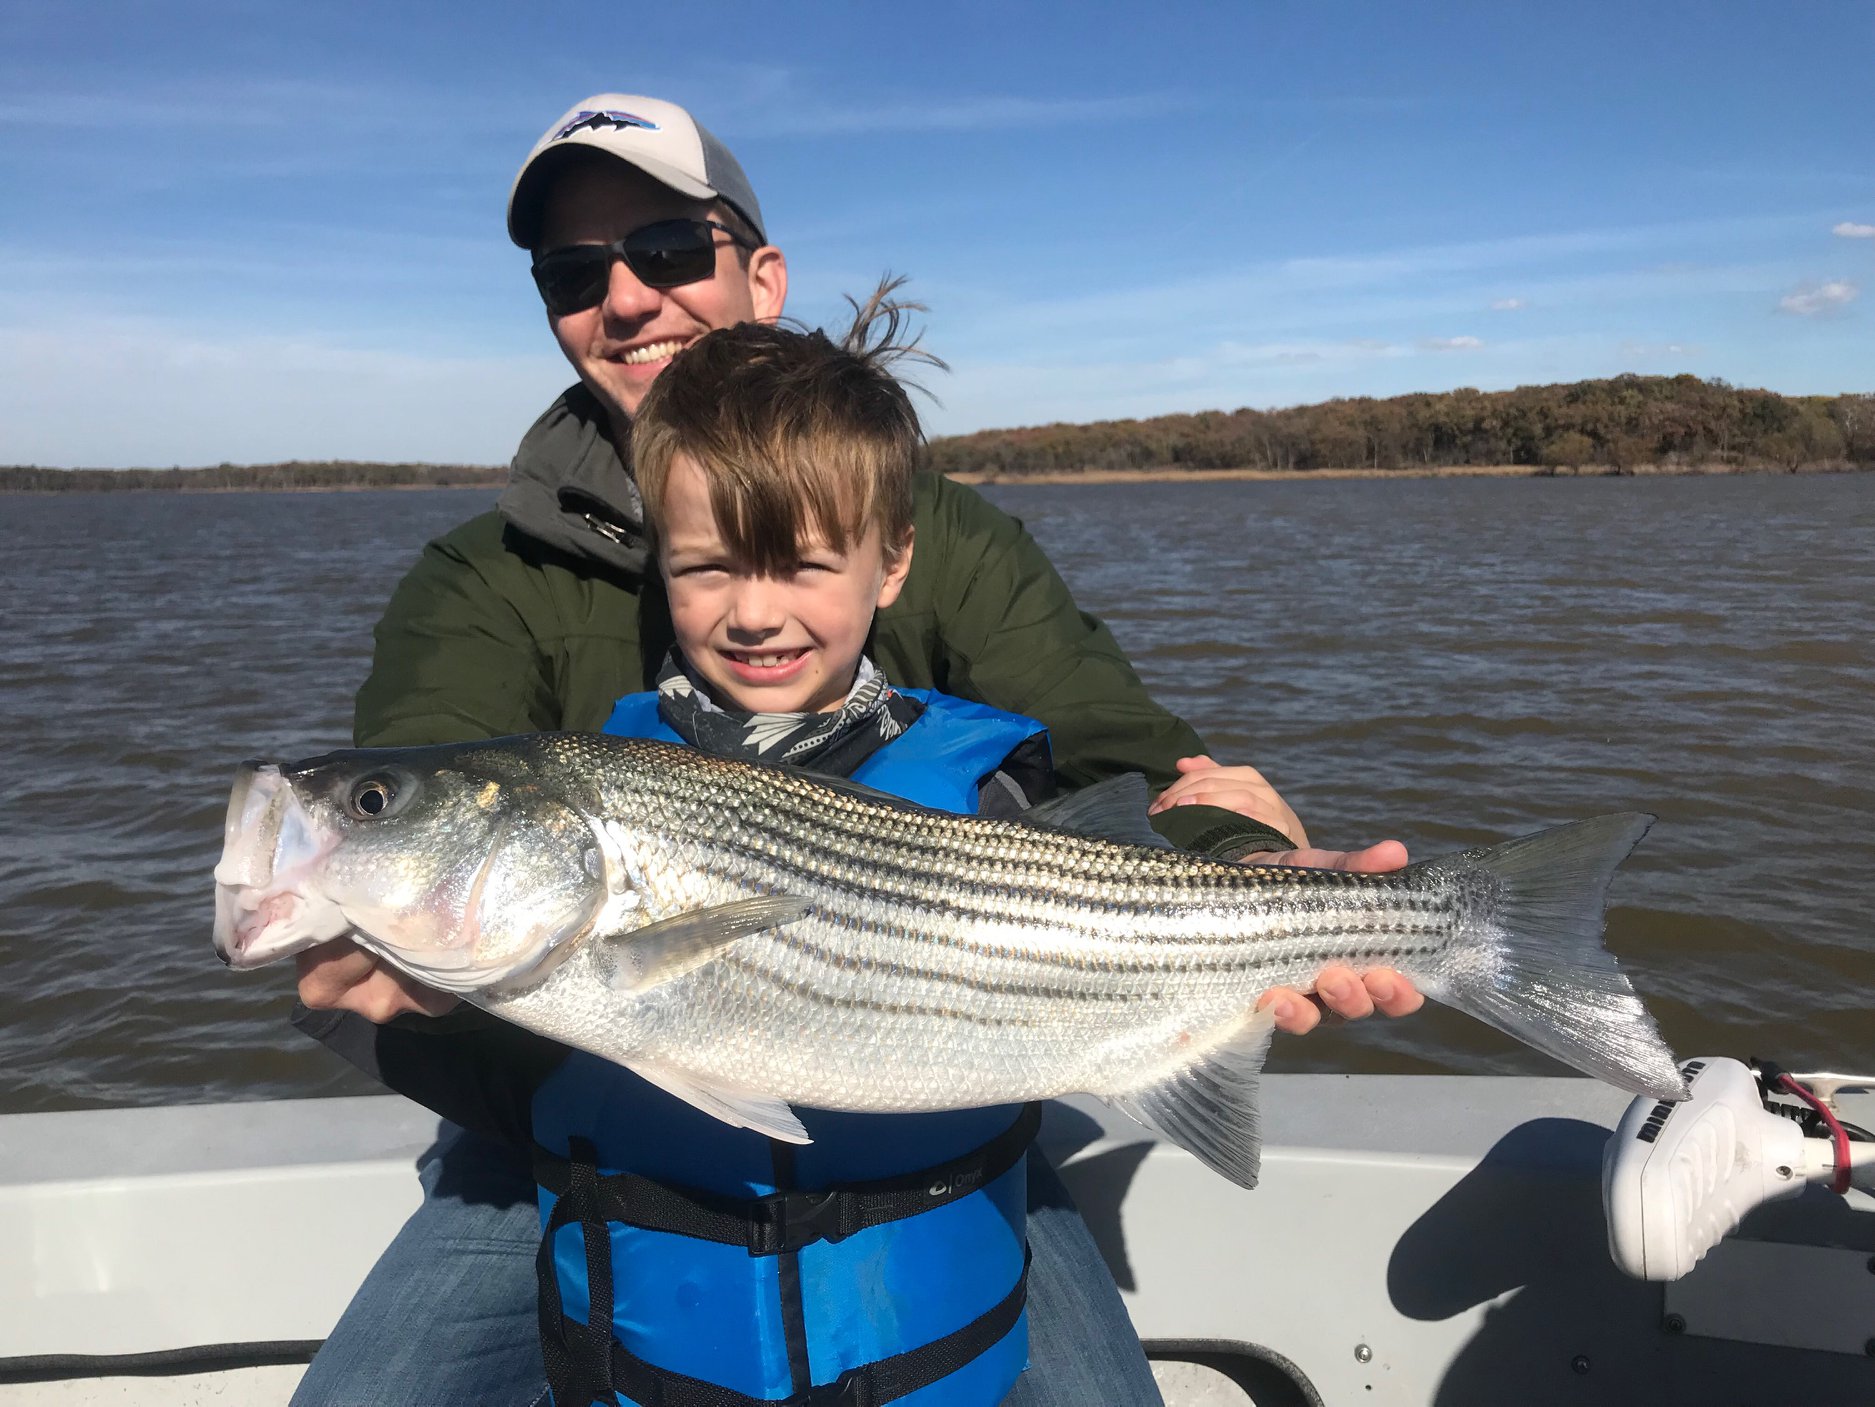 How To Find The Best Lake Texoma Fishing Guides